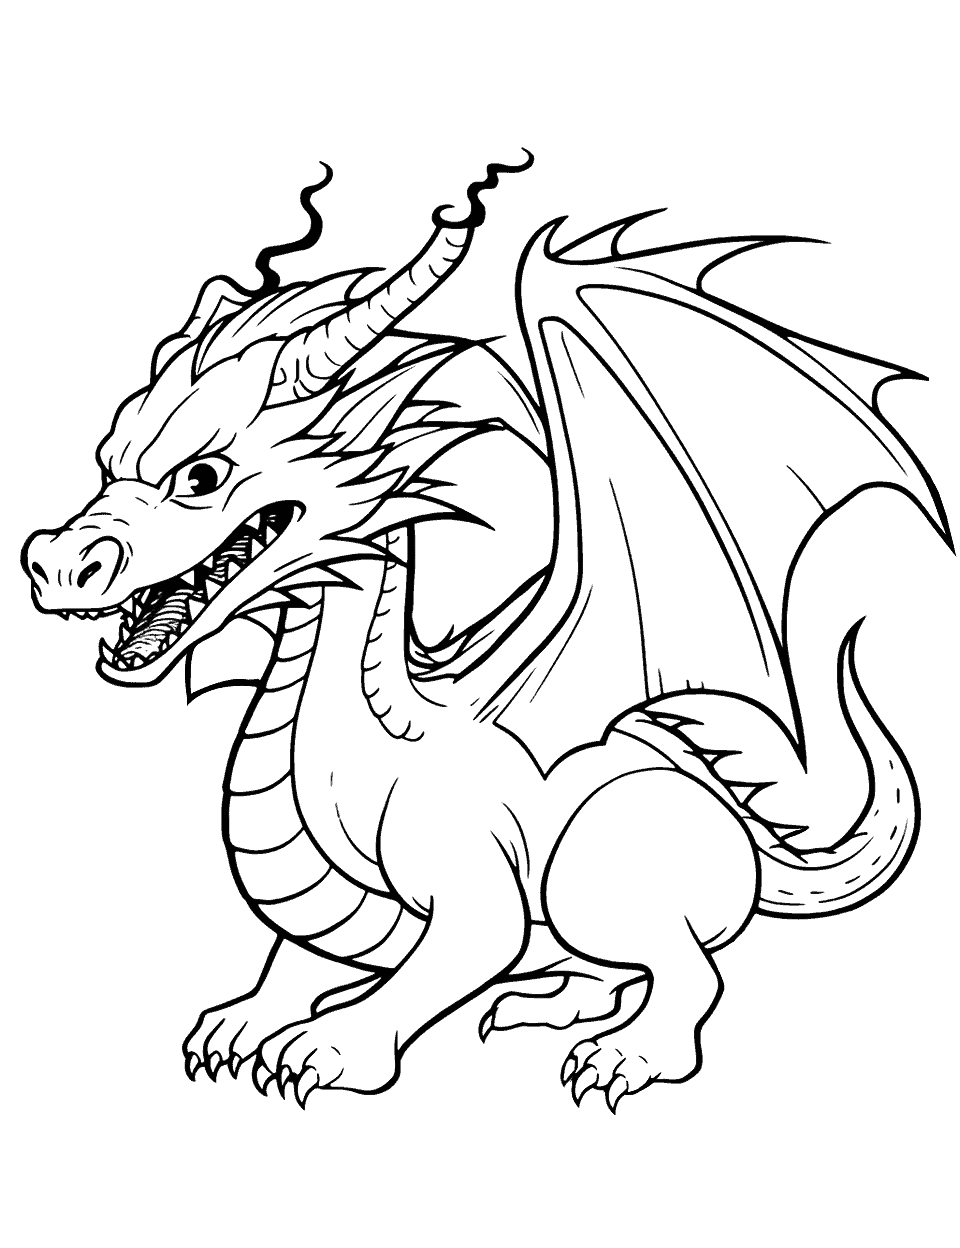 Fire Dragon Coloring Page - An imposing fire dragon, mouth open, ready to belch flames into the sky.